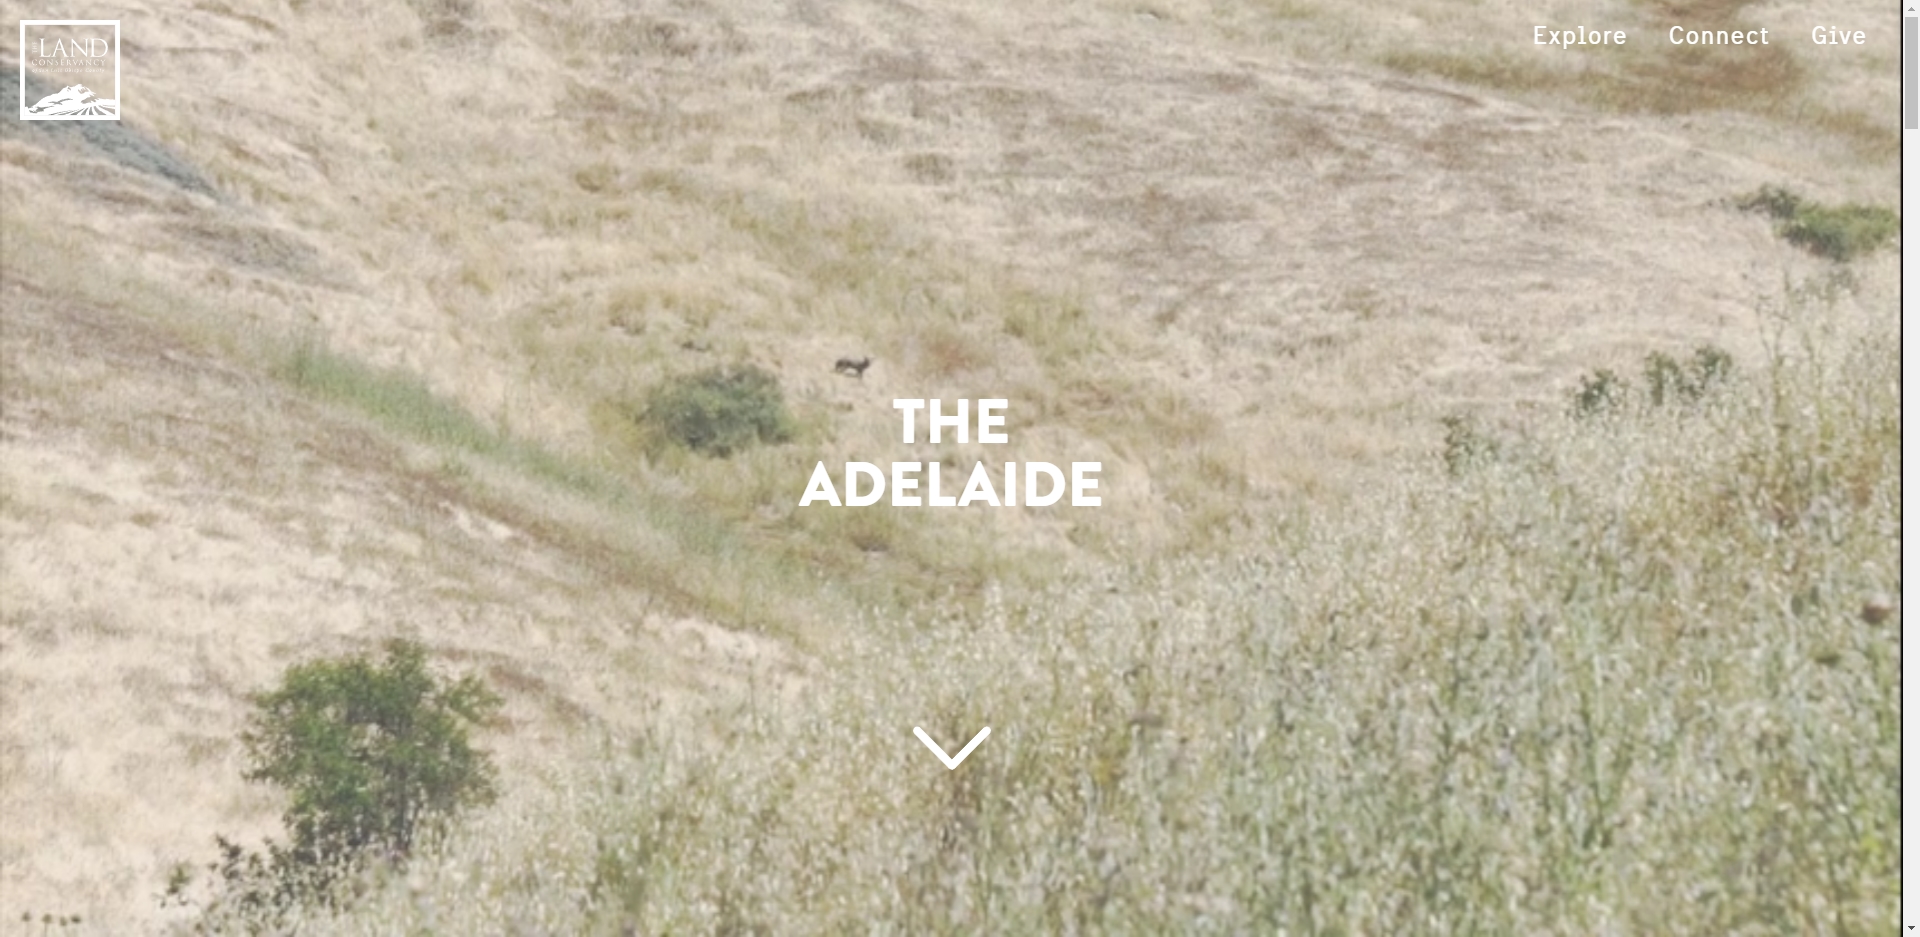 Protect the Adelaide, Kyle Walsh